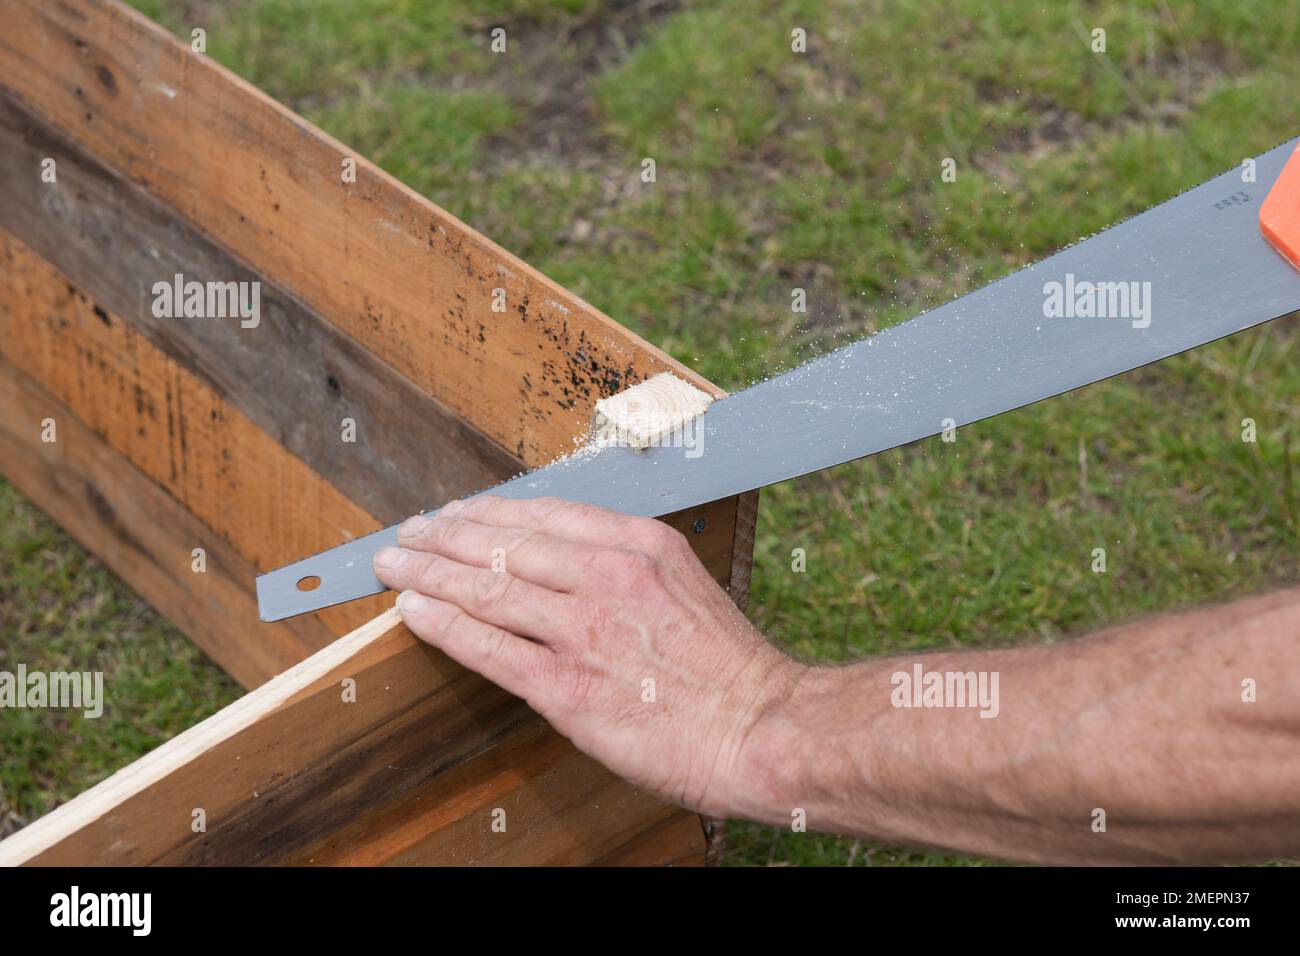 Sawing wood to construct cold frame Stock Photo